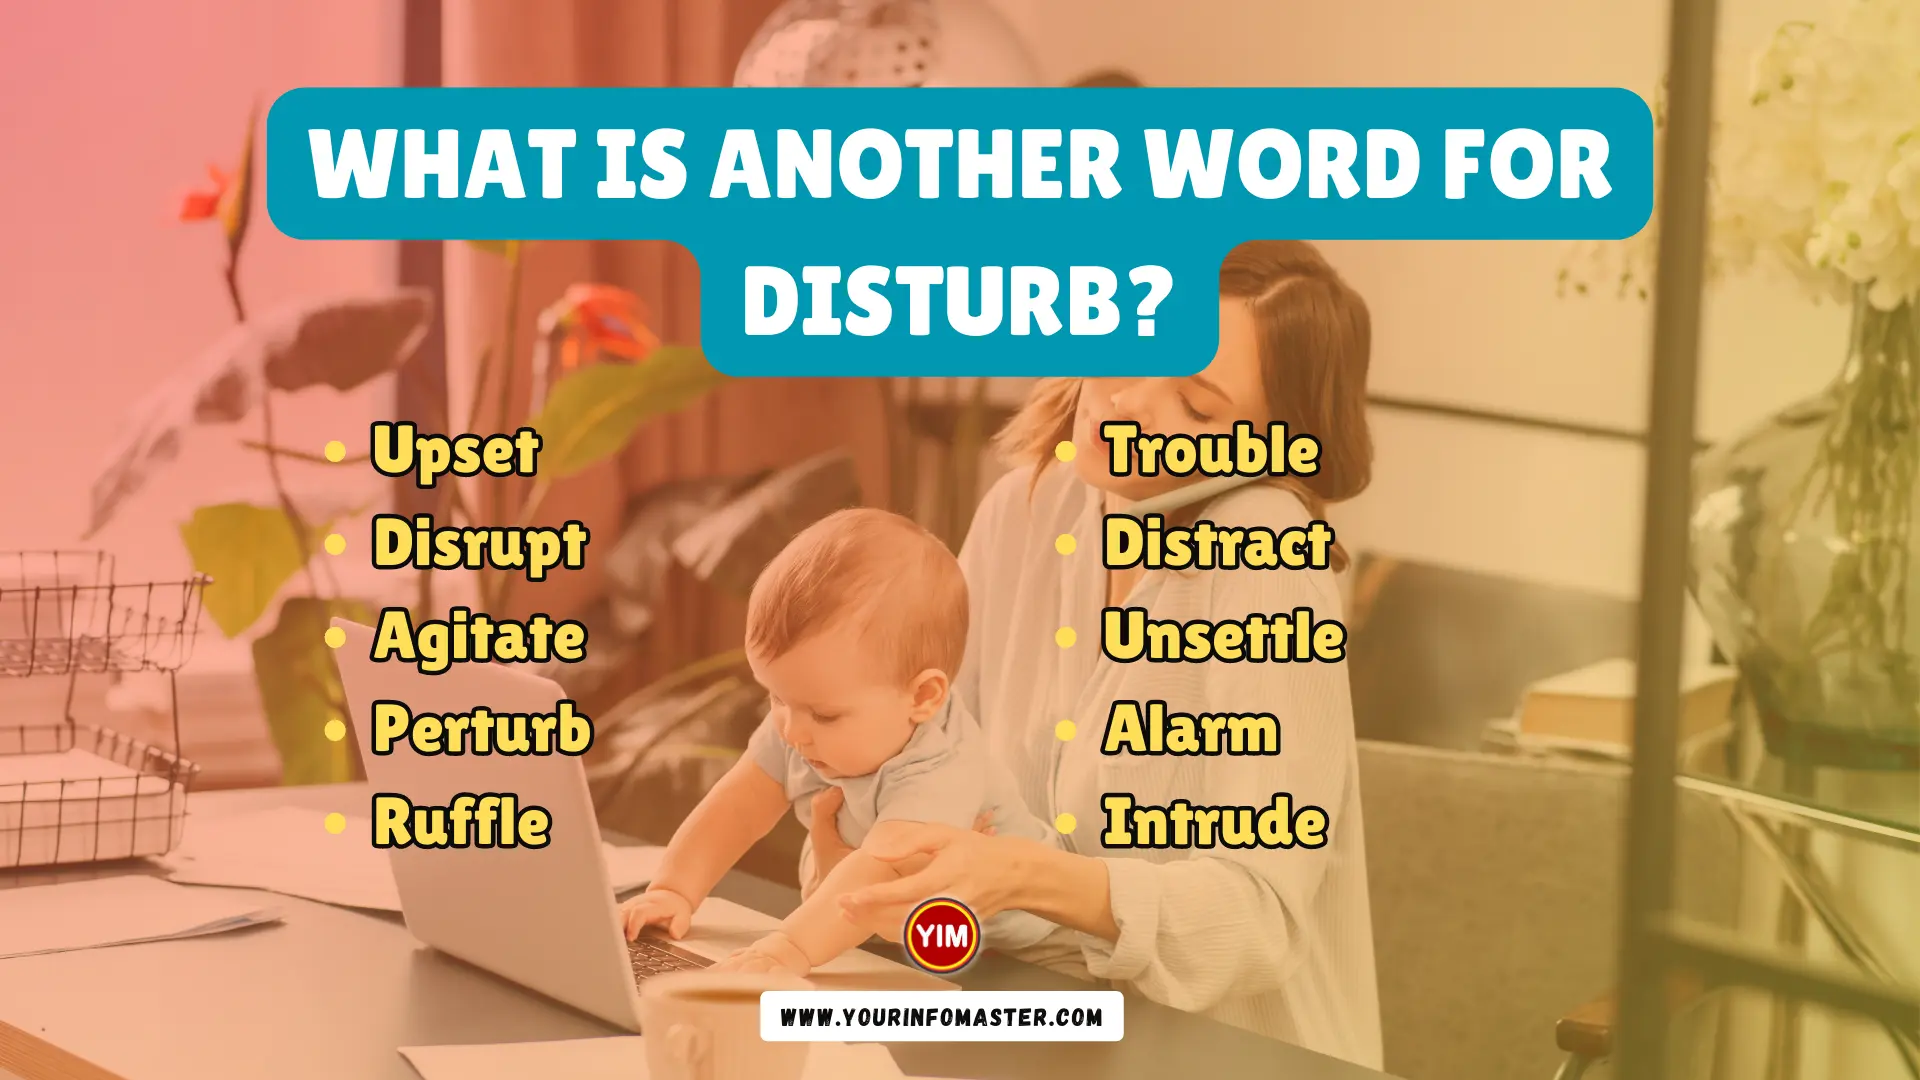 What is another word for Disturb